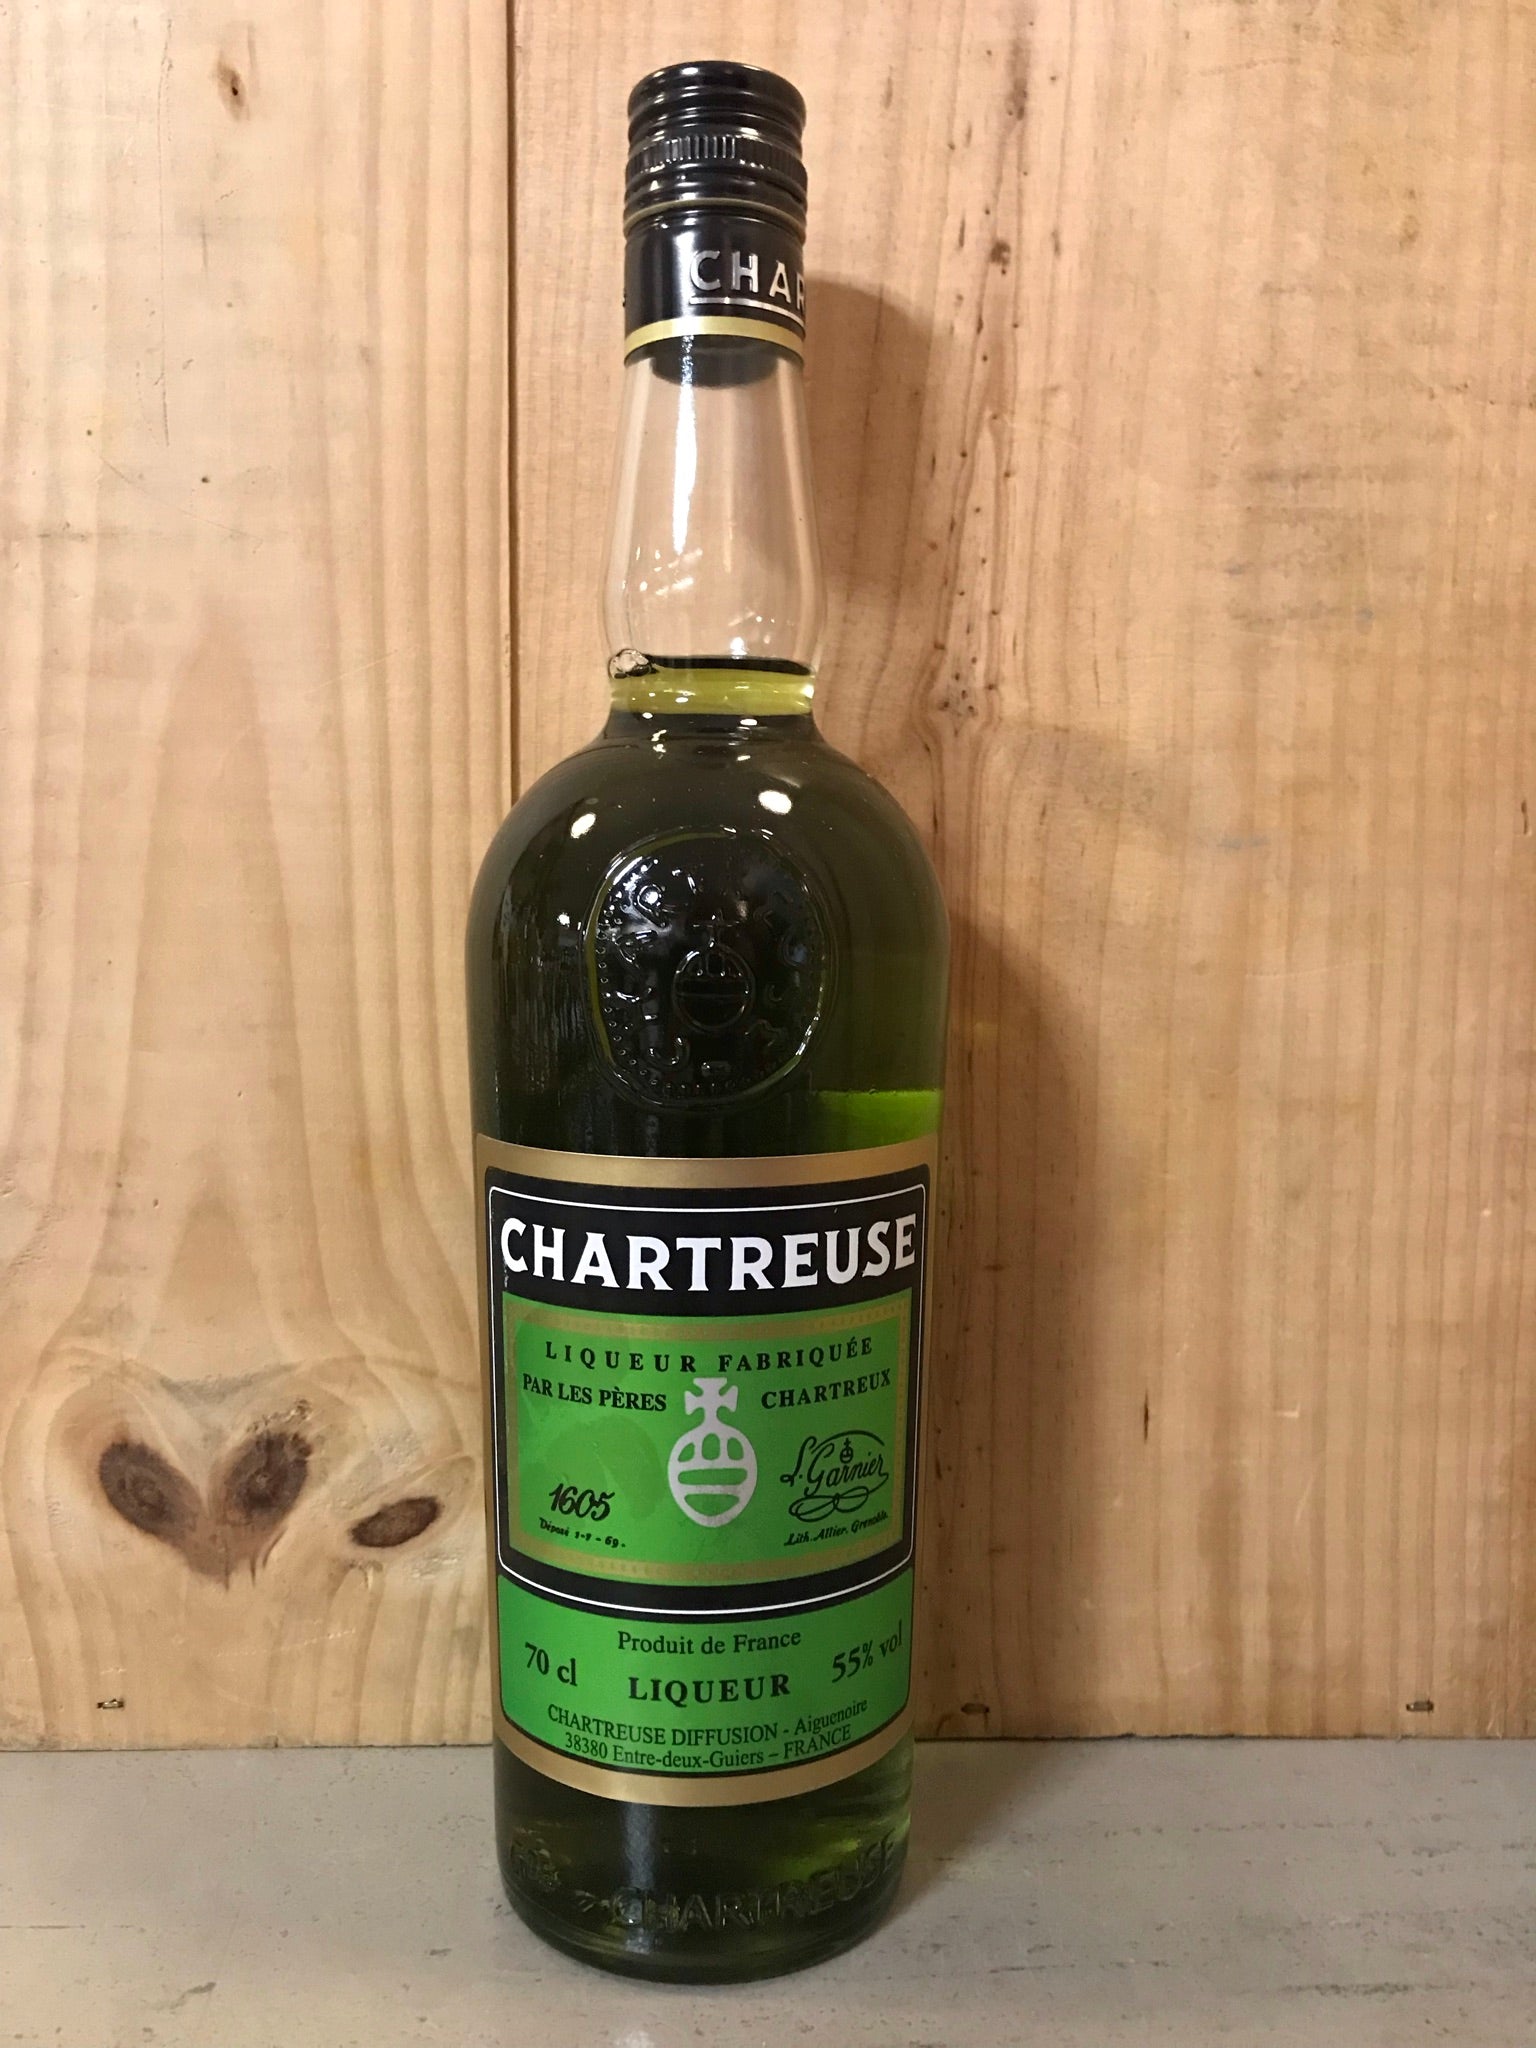 Chartreuse Verte 70cl – Bottle of Italy